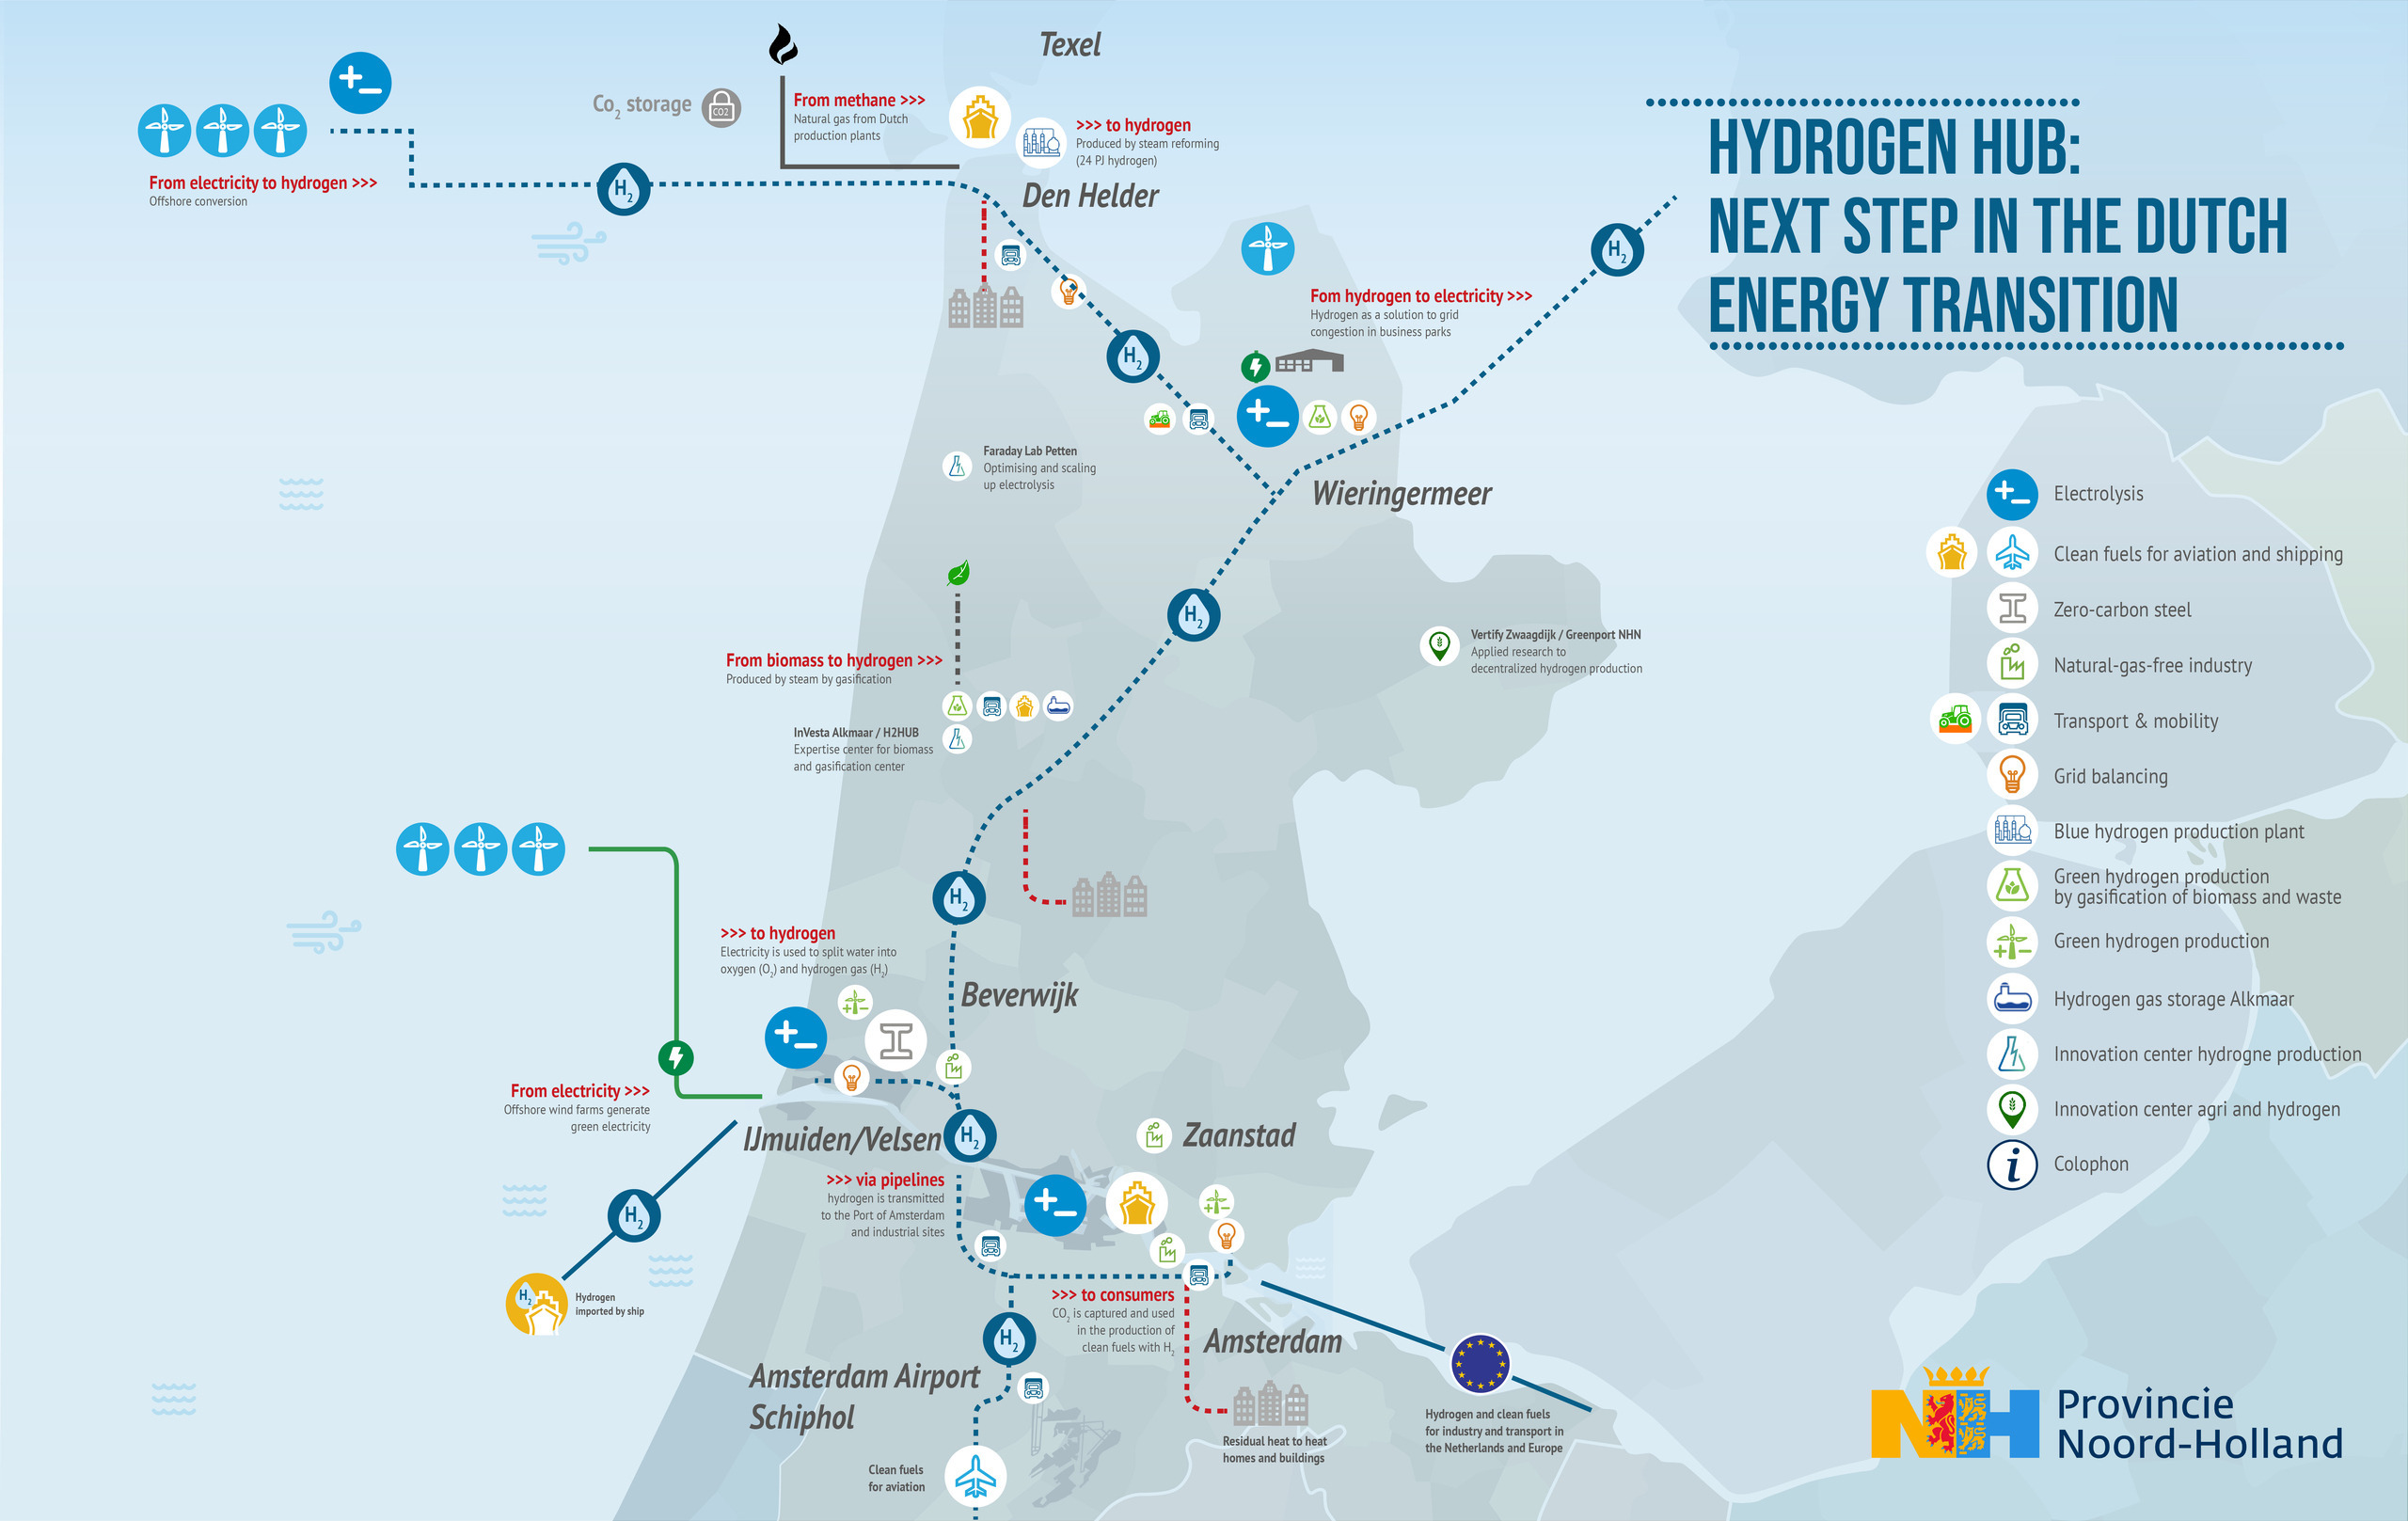 Hydrogen valley: next step in the Dutch energy transition